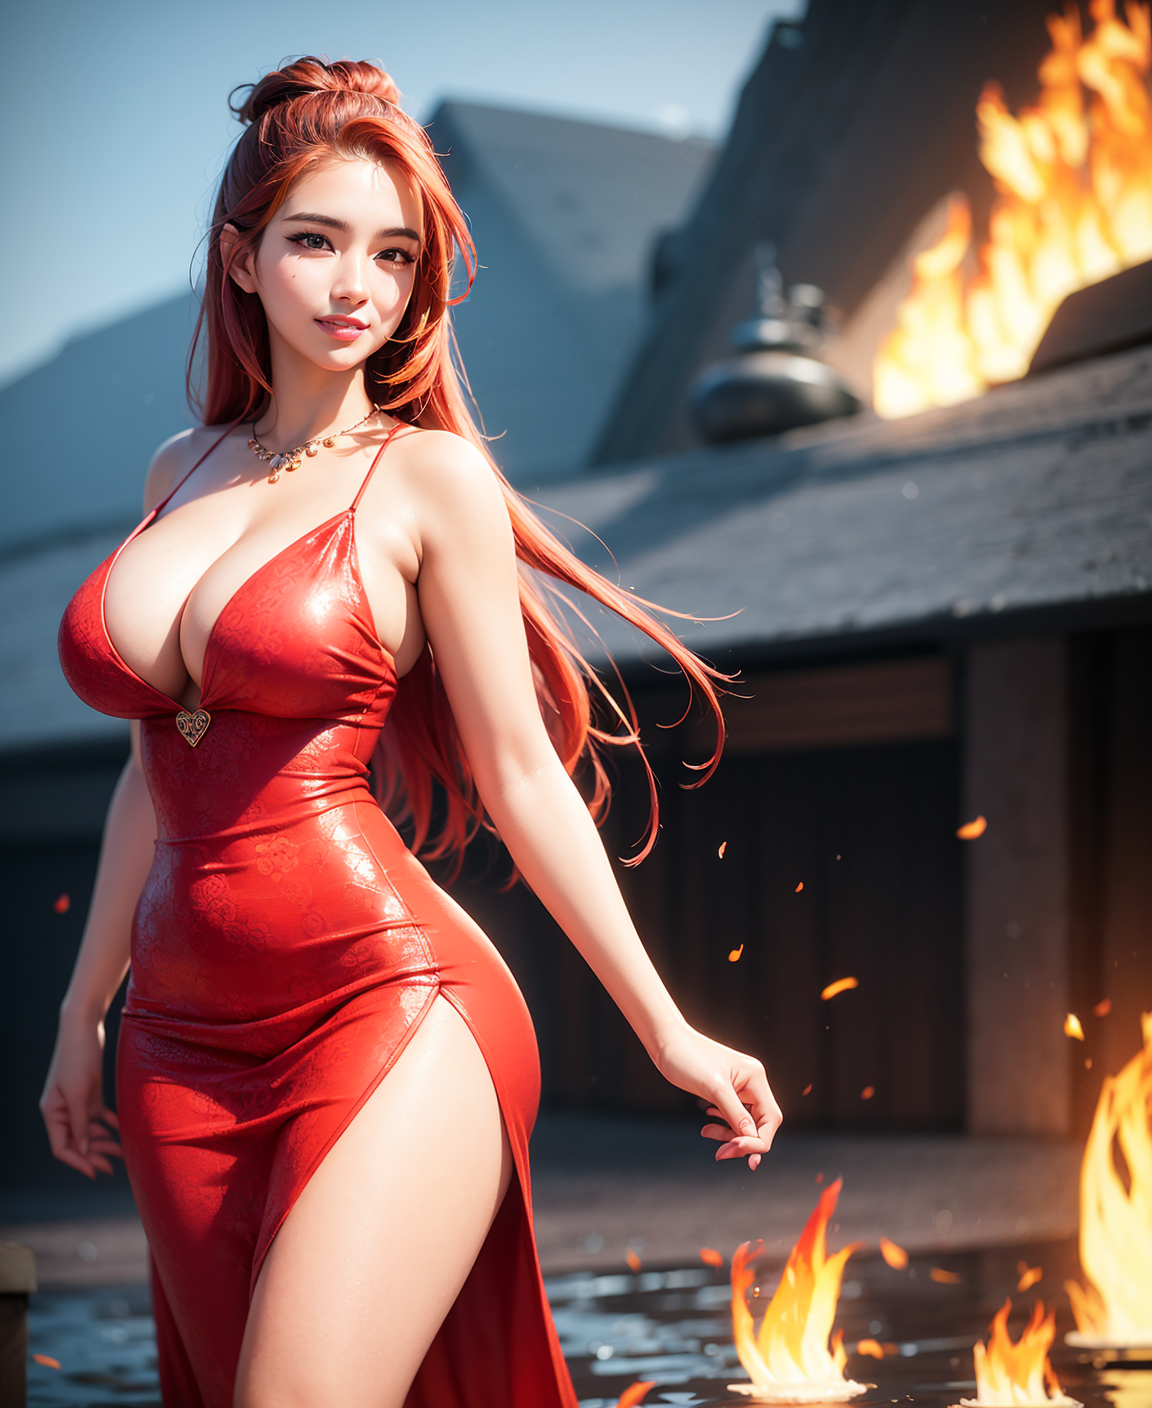 AIbot, big boobs, thighs, women, Asian, looking at viewer, redhead,  cleavage, AI art, tight dress, fire, portrait display, dress, tight  clothing, red dress